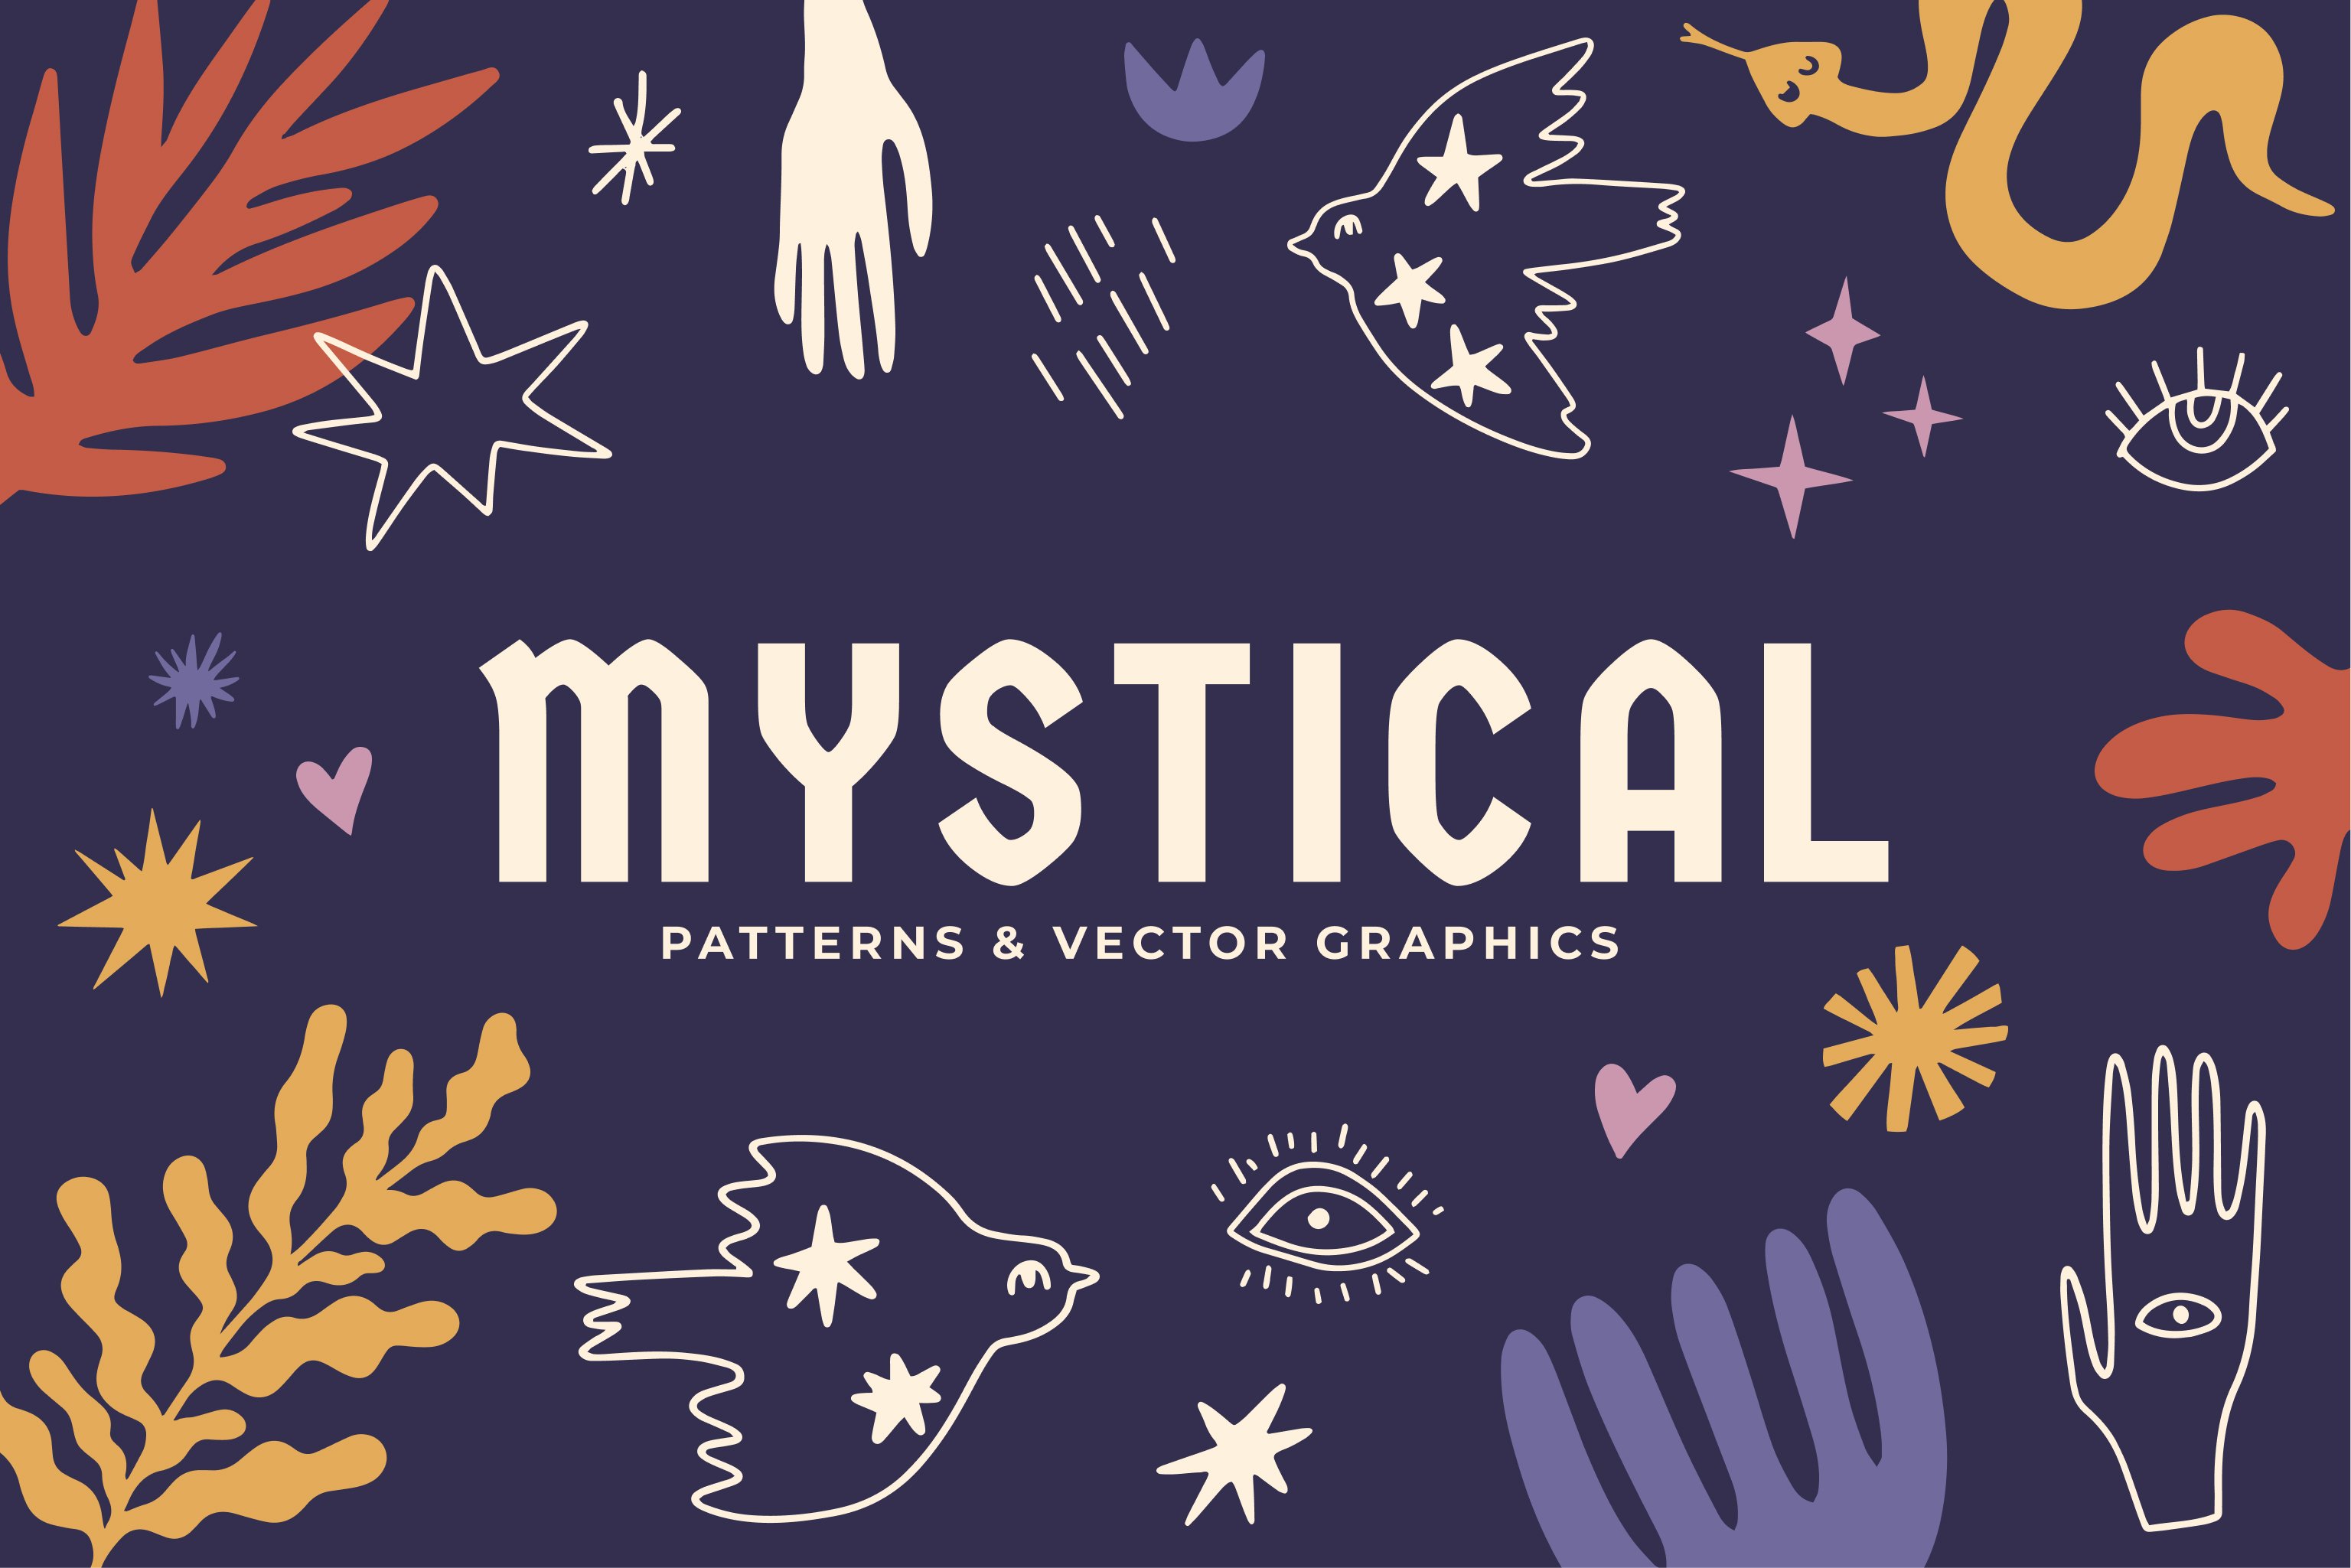 MYSTICAL patterns & graphic cover image.